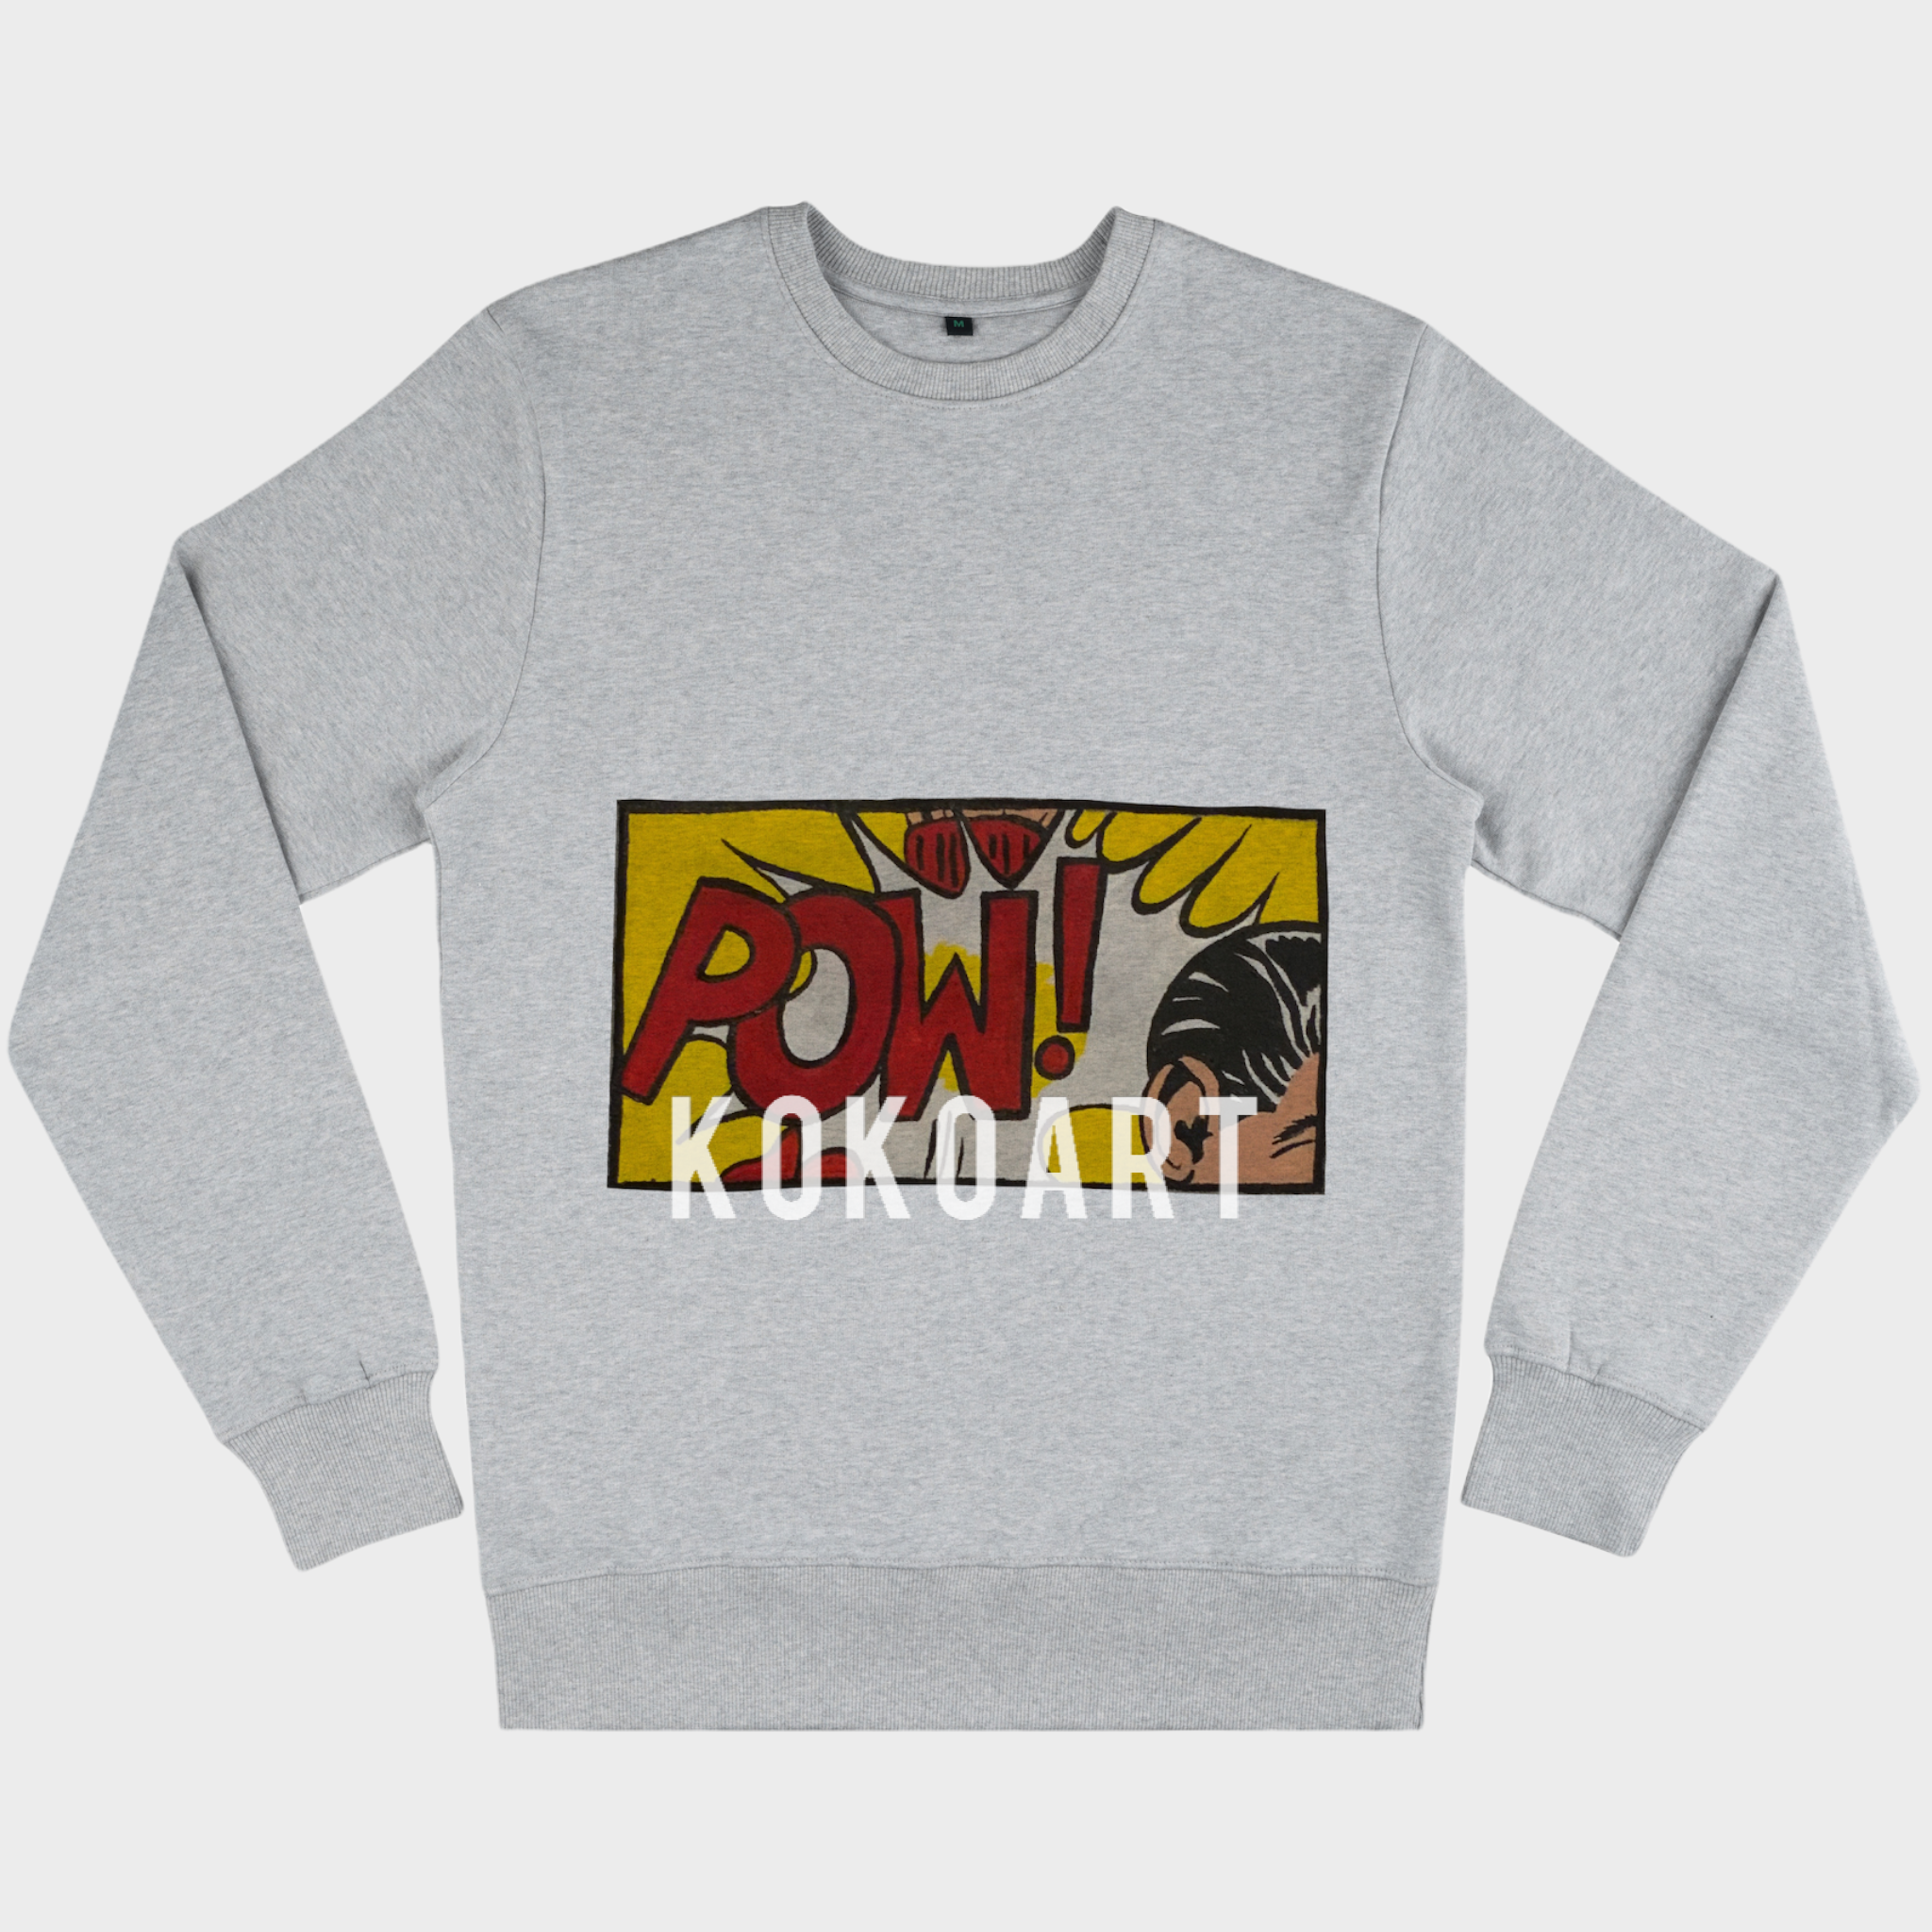 Pow! - Hand painted Organic Cotton Clothing